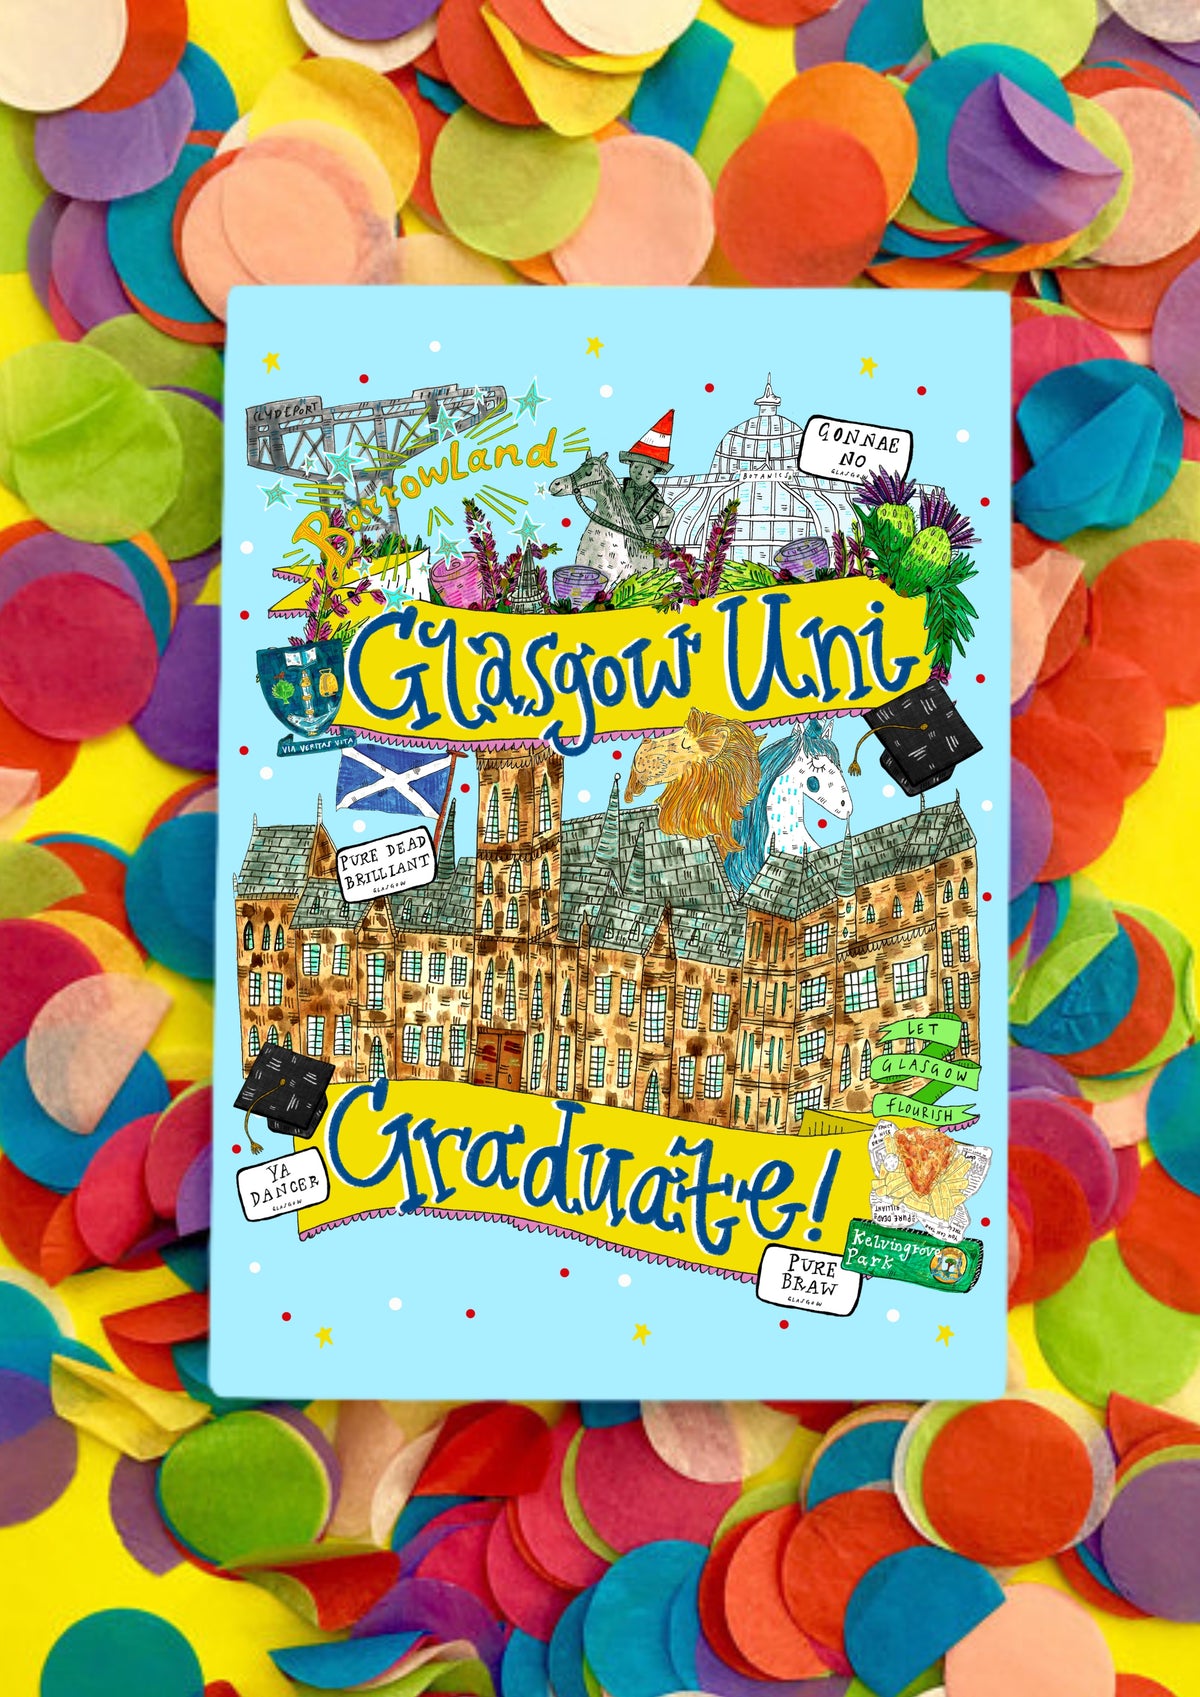 A greetings card with a light blue background with 2 large yellow banners with the words &#39;Glasgow Uni Graduate!&#39;. There are lots of illustrations of Glasgow including Glasgow University, The Finnieston Crane, Glasgow Botanic Gardens, The Wellington Statue and other Scottish famous icons. the card is lying on a bed of rainbow confetti.